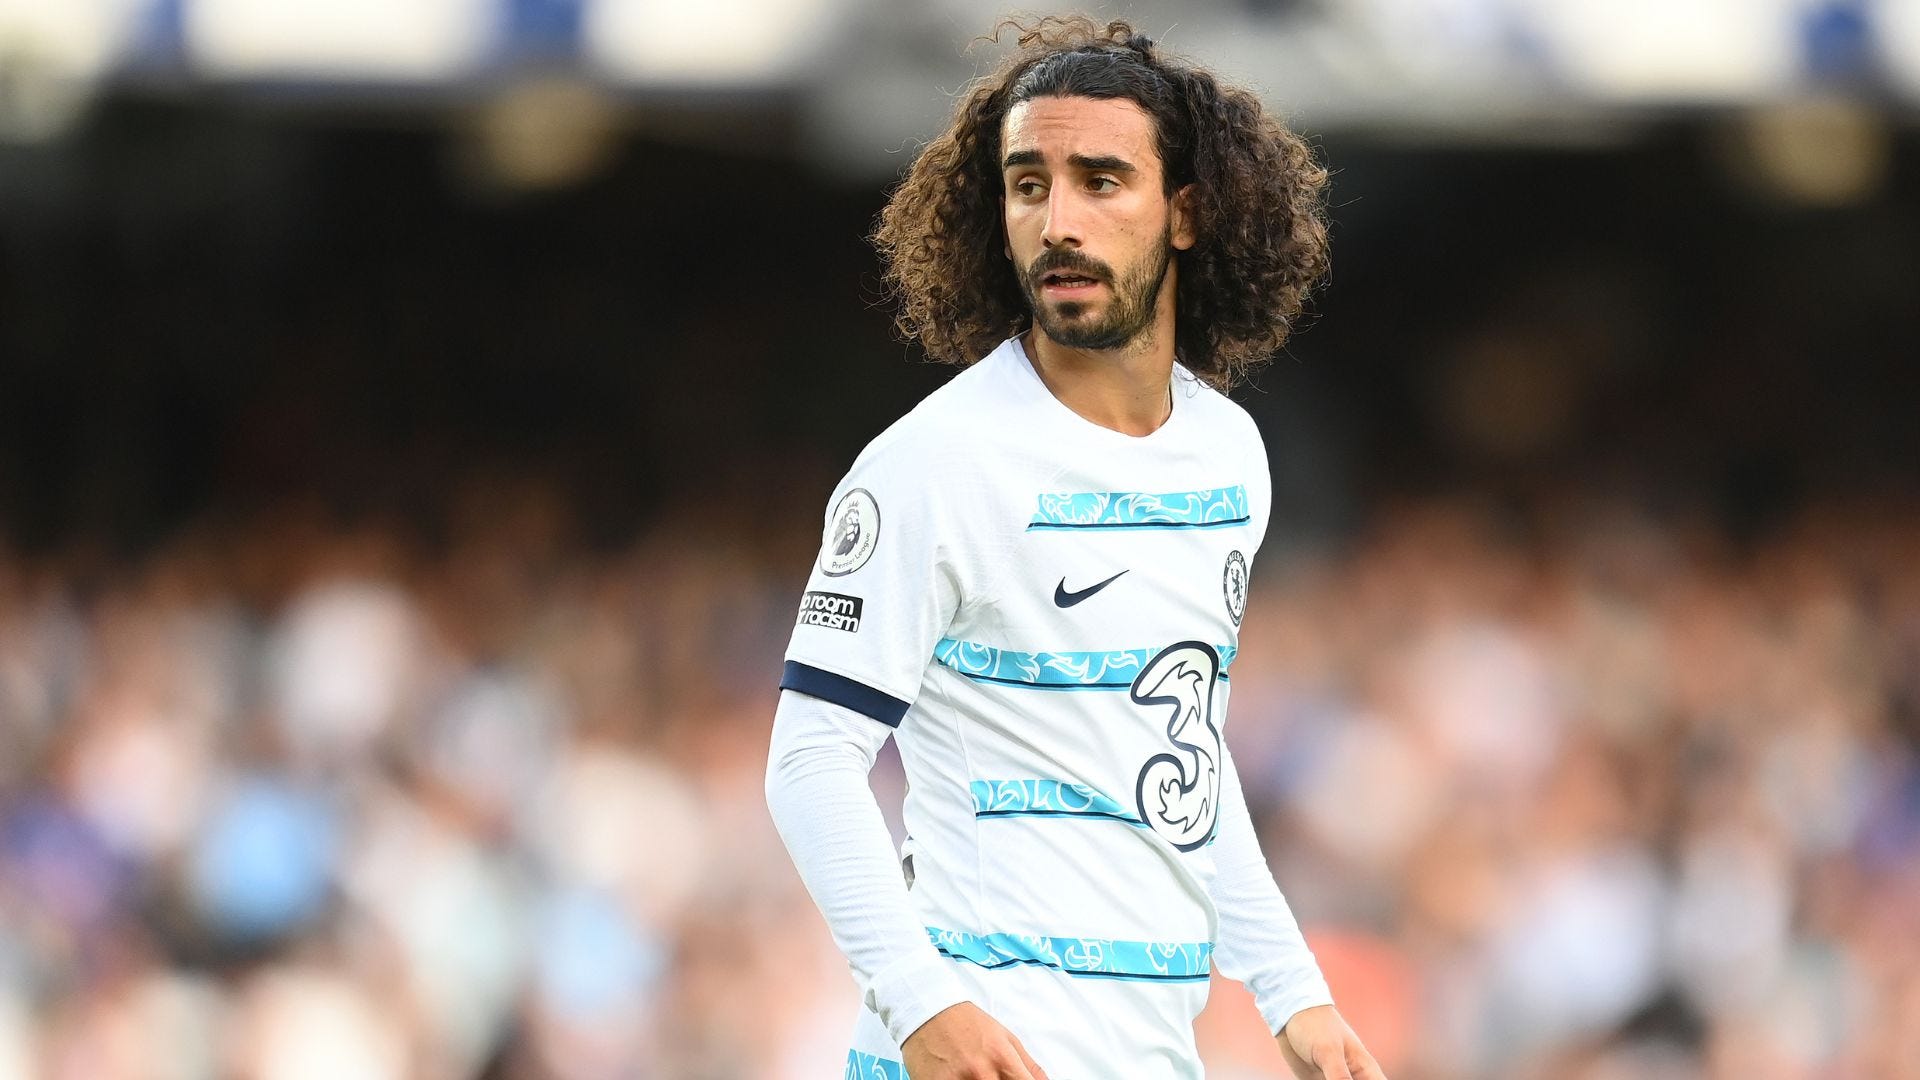 Never, this is my style!' - Chelsea new boy Cucurella rules out cutting his  hair after Romero clash in Spurs draw 